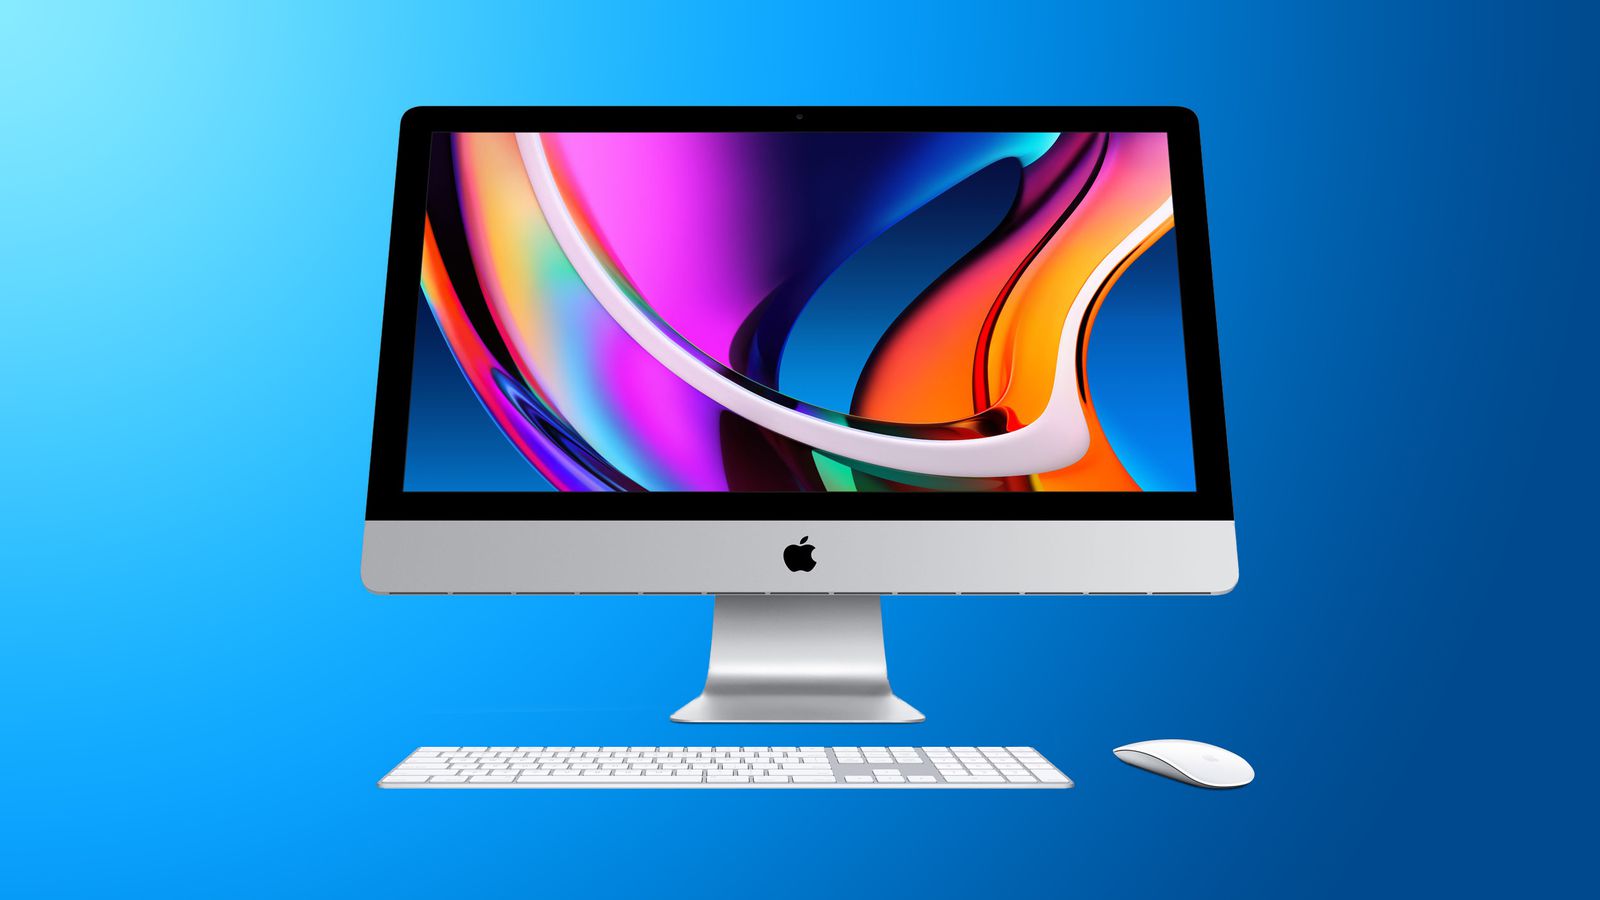 Have We Seen the Last of the 27-inch iMac? - MacRumors